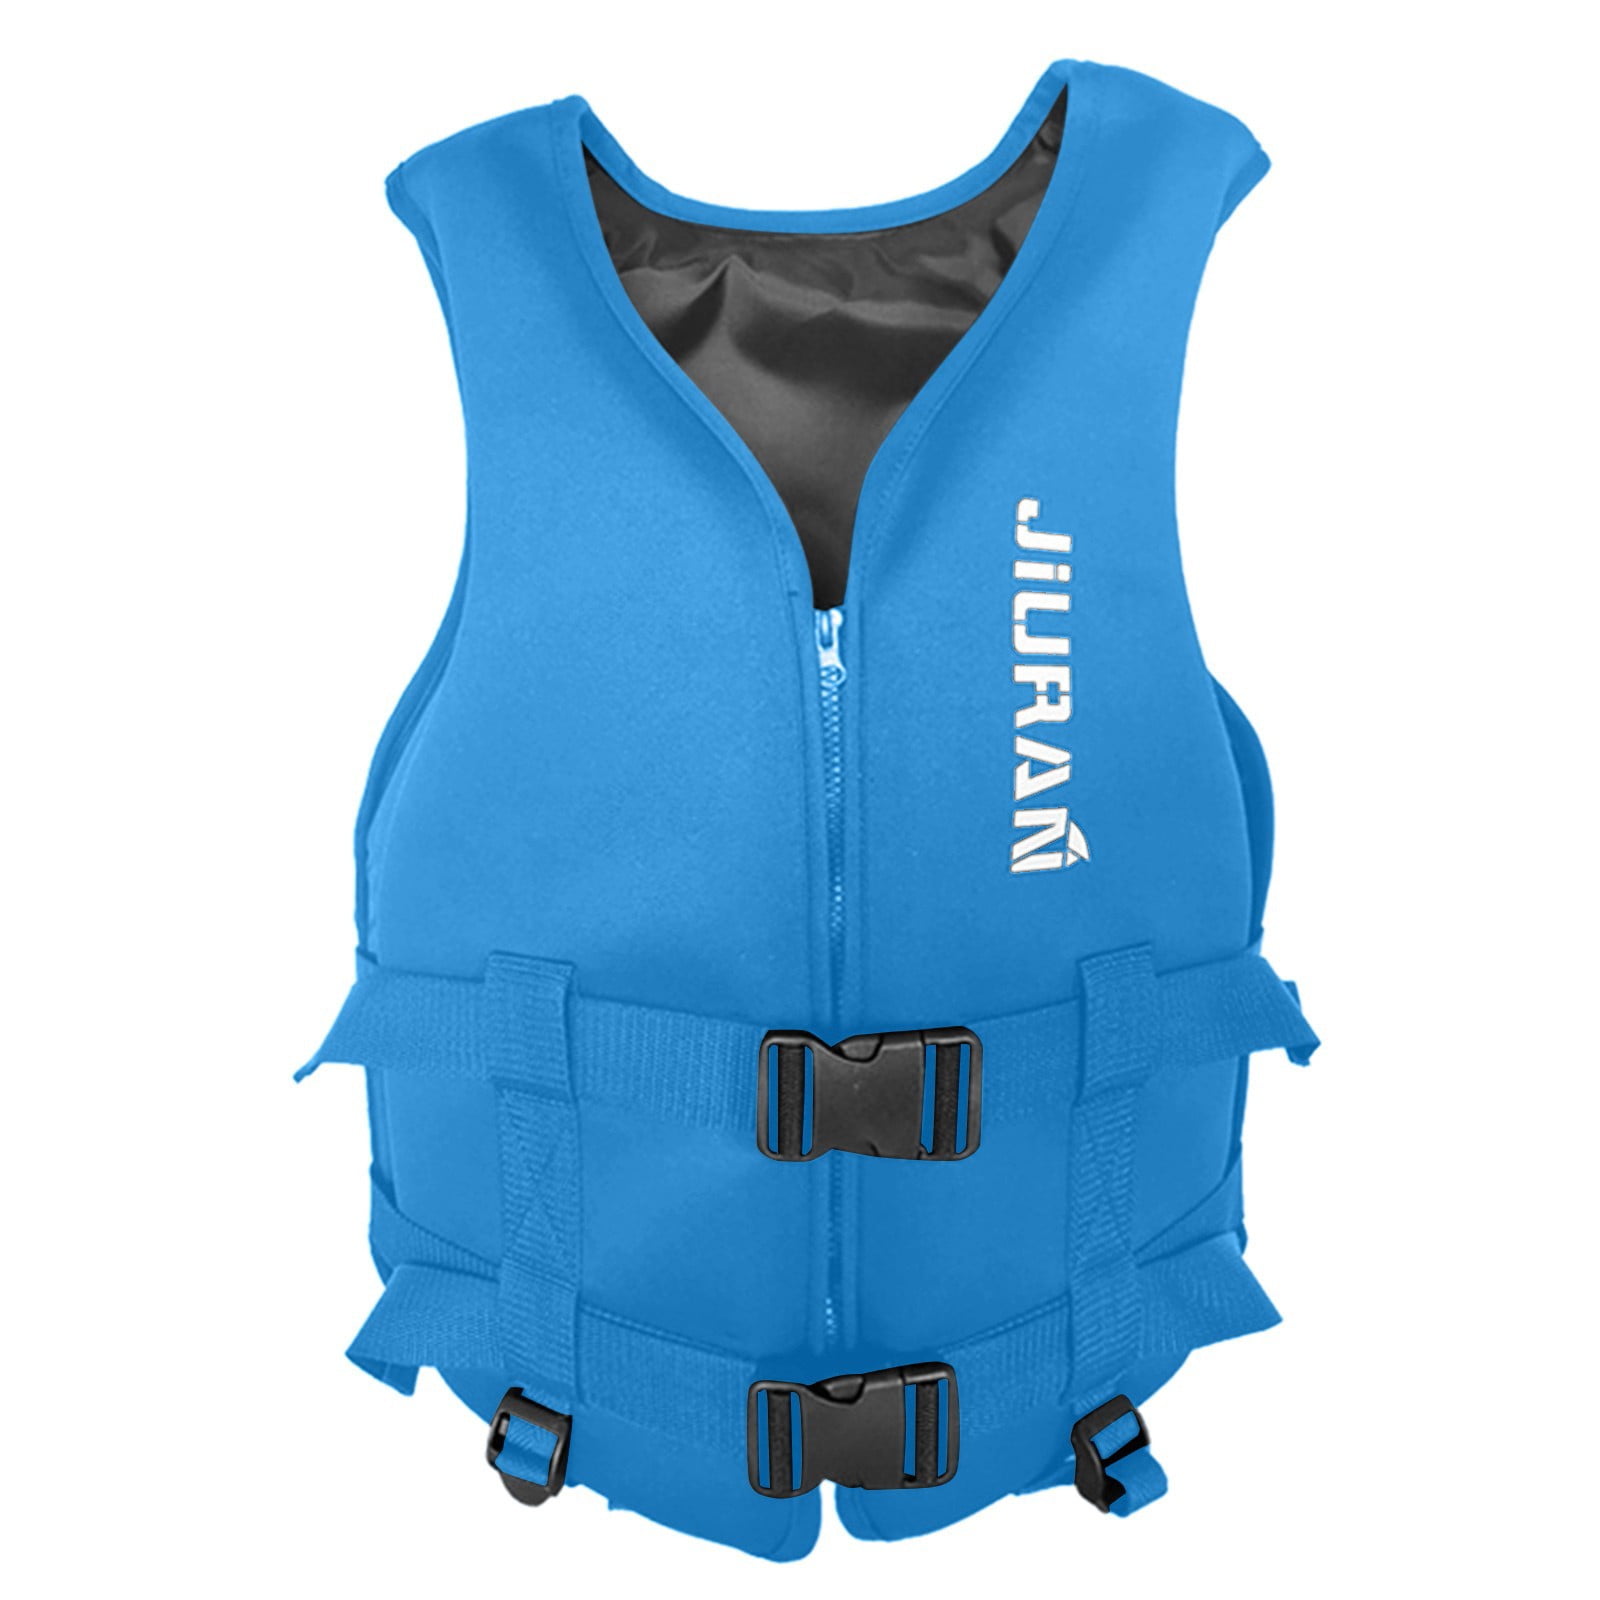 STEARNS Adult Watersport Classic Series Life Vest Blue 